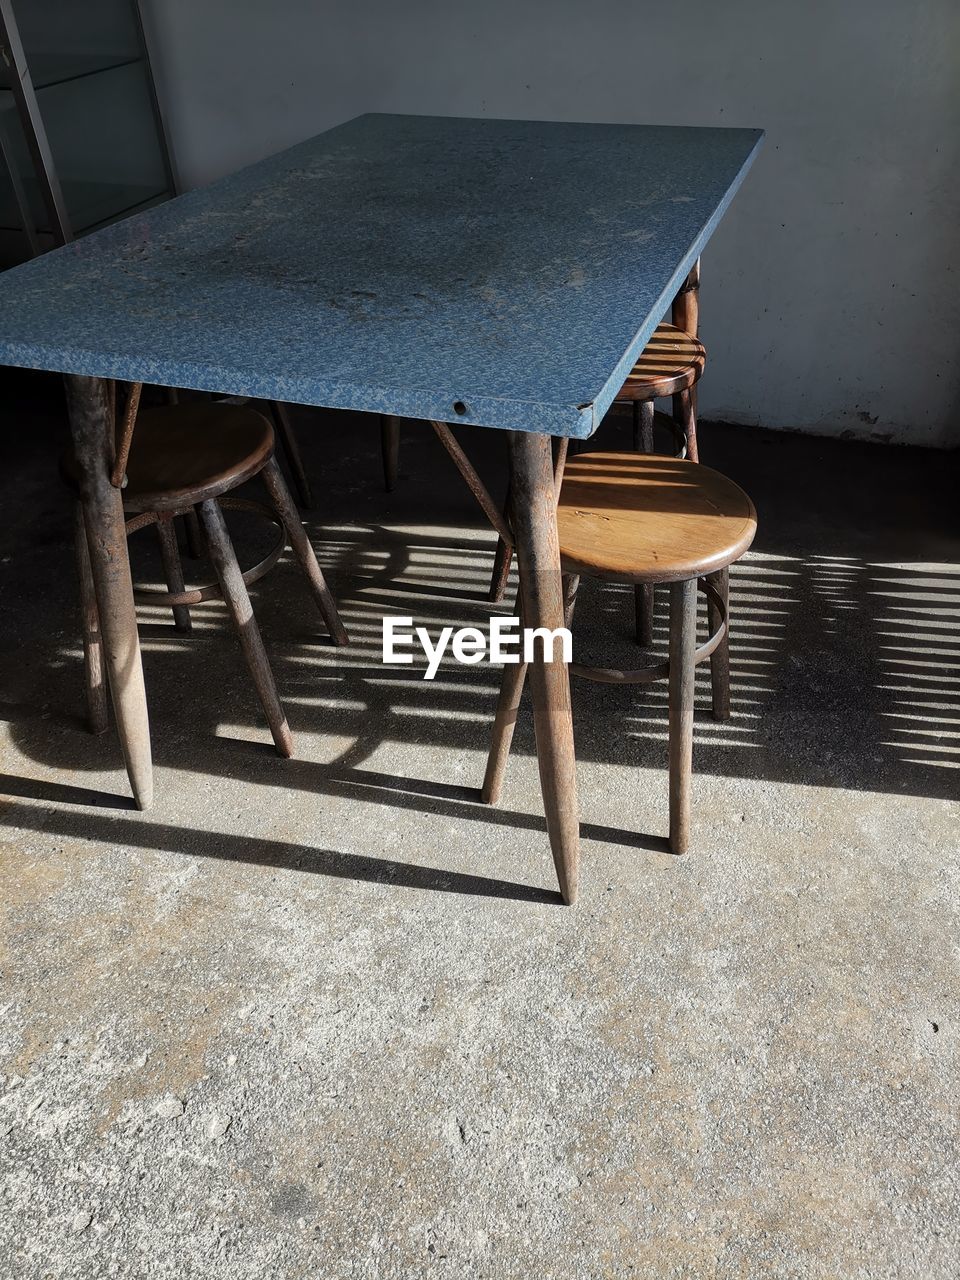 HIGH ANGLE VIEW OF EMPTY CHAIRS AND TABLE ON FLOOR